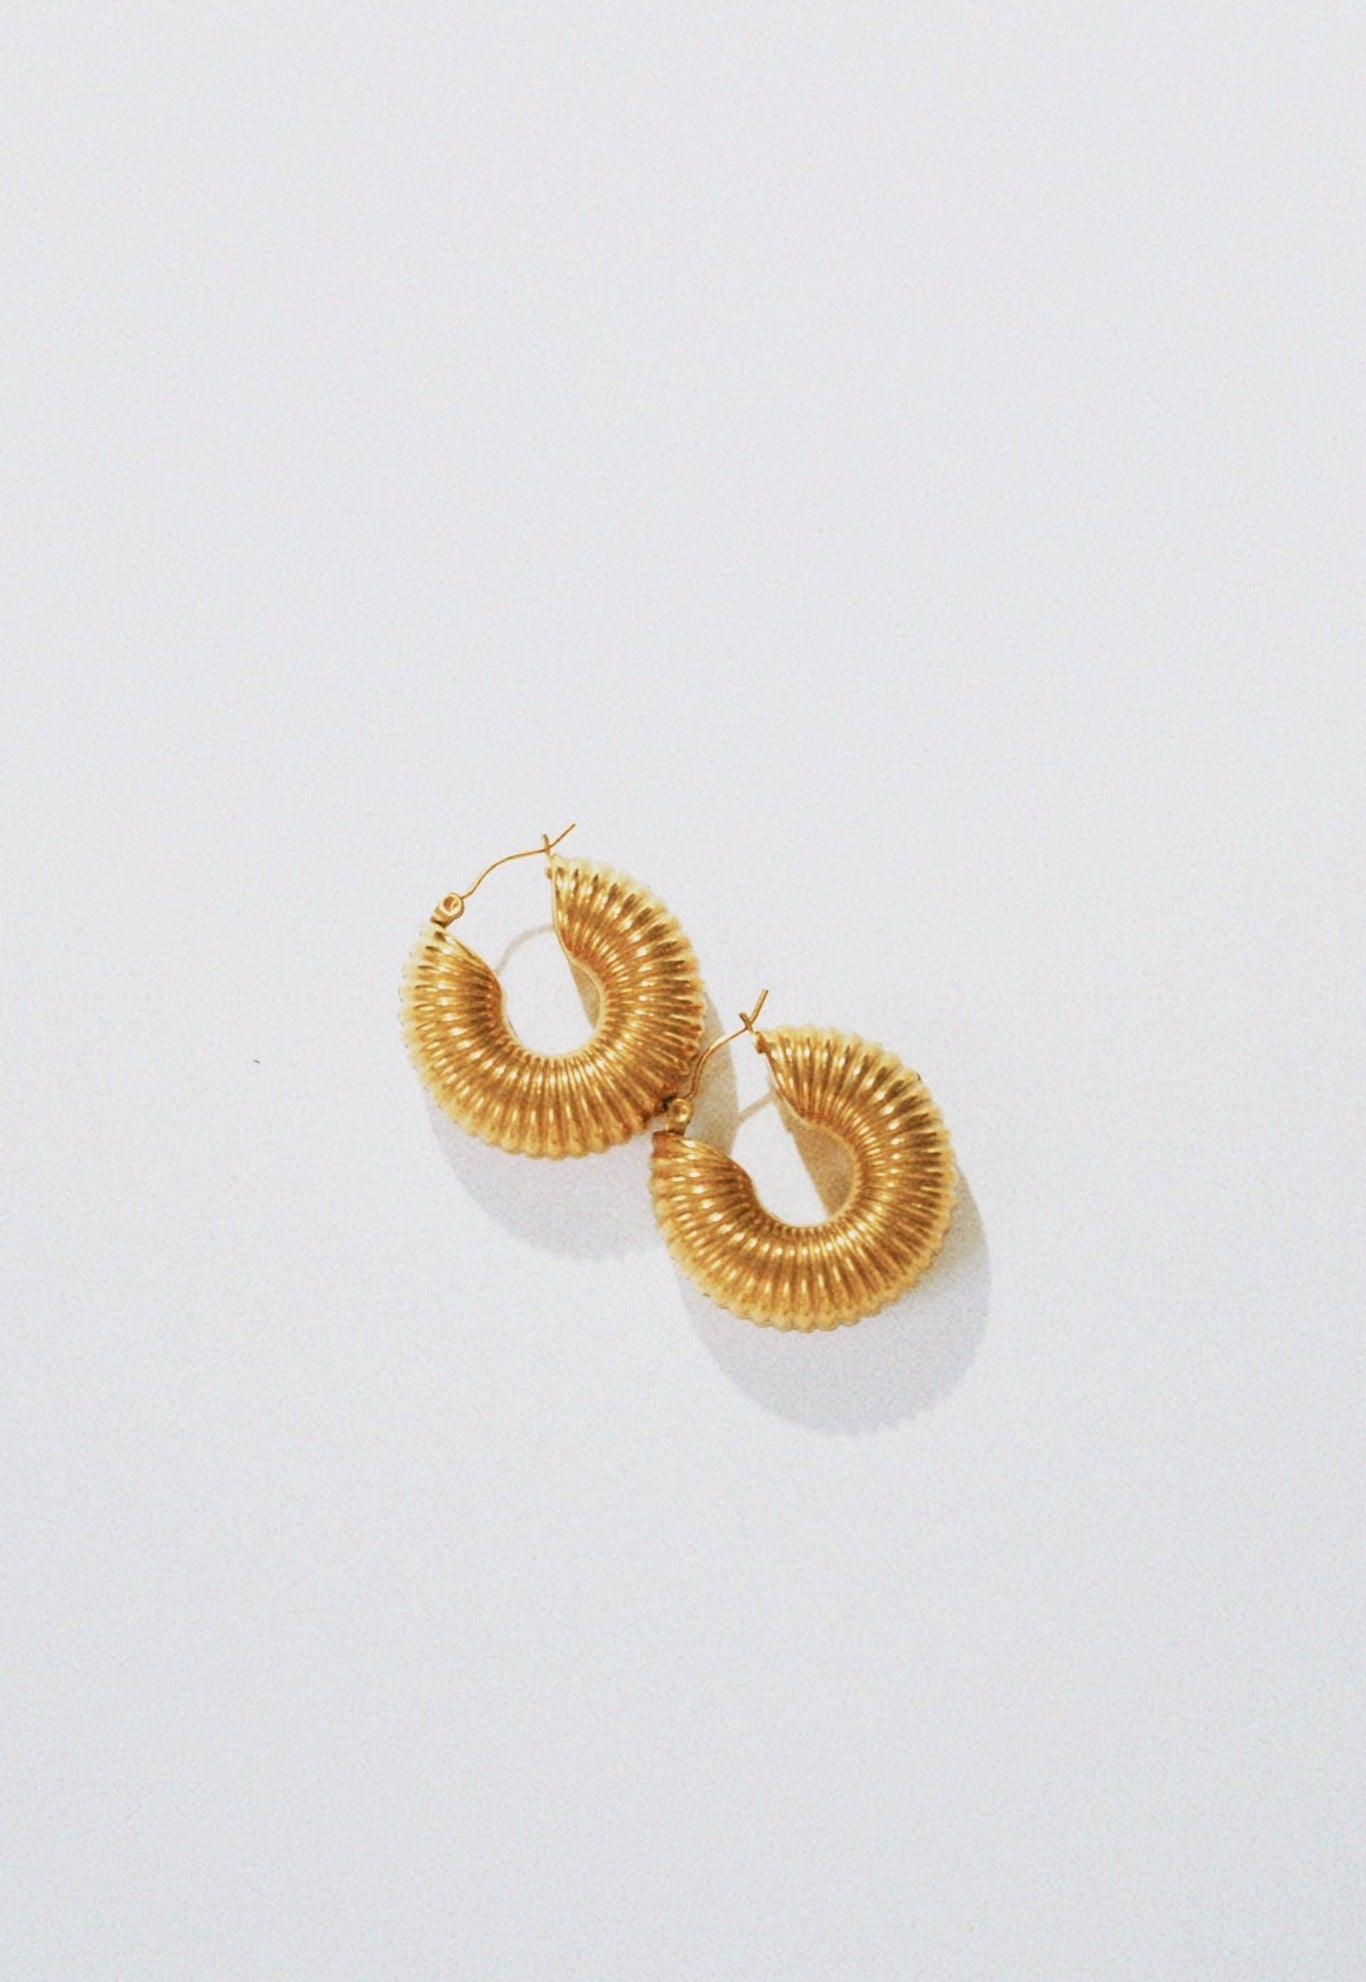 Dixie Jem oversized chunky textured gold plated vintage inspired think hoop earrings